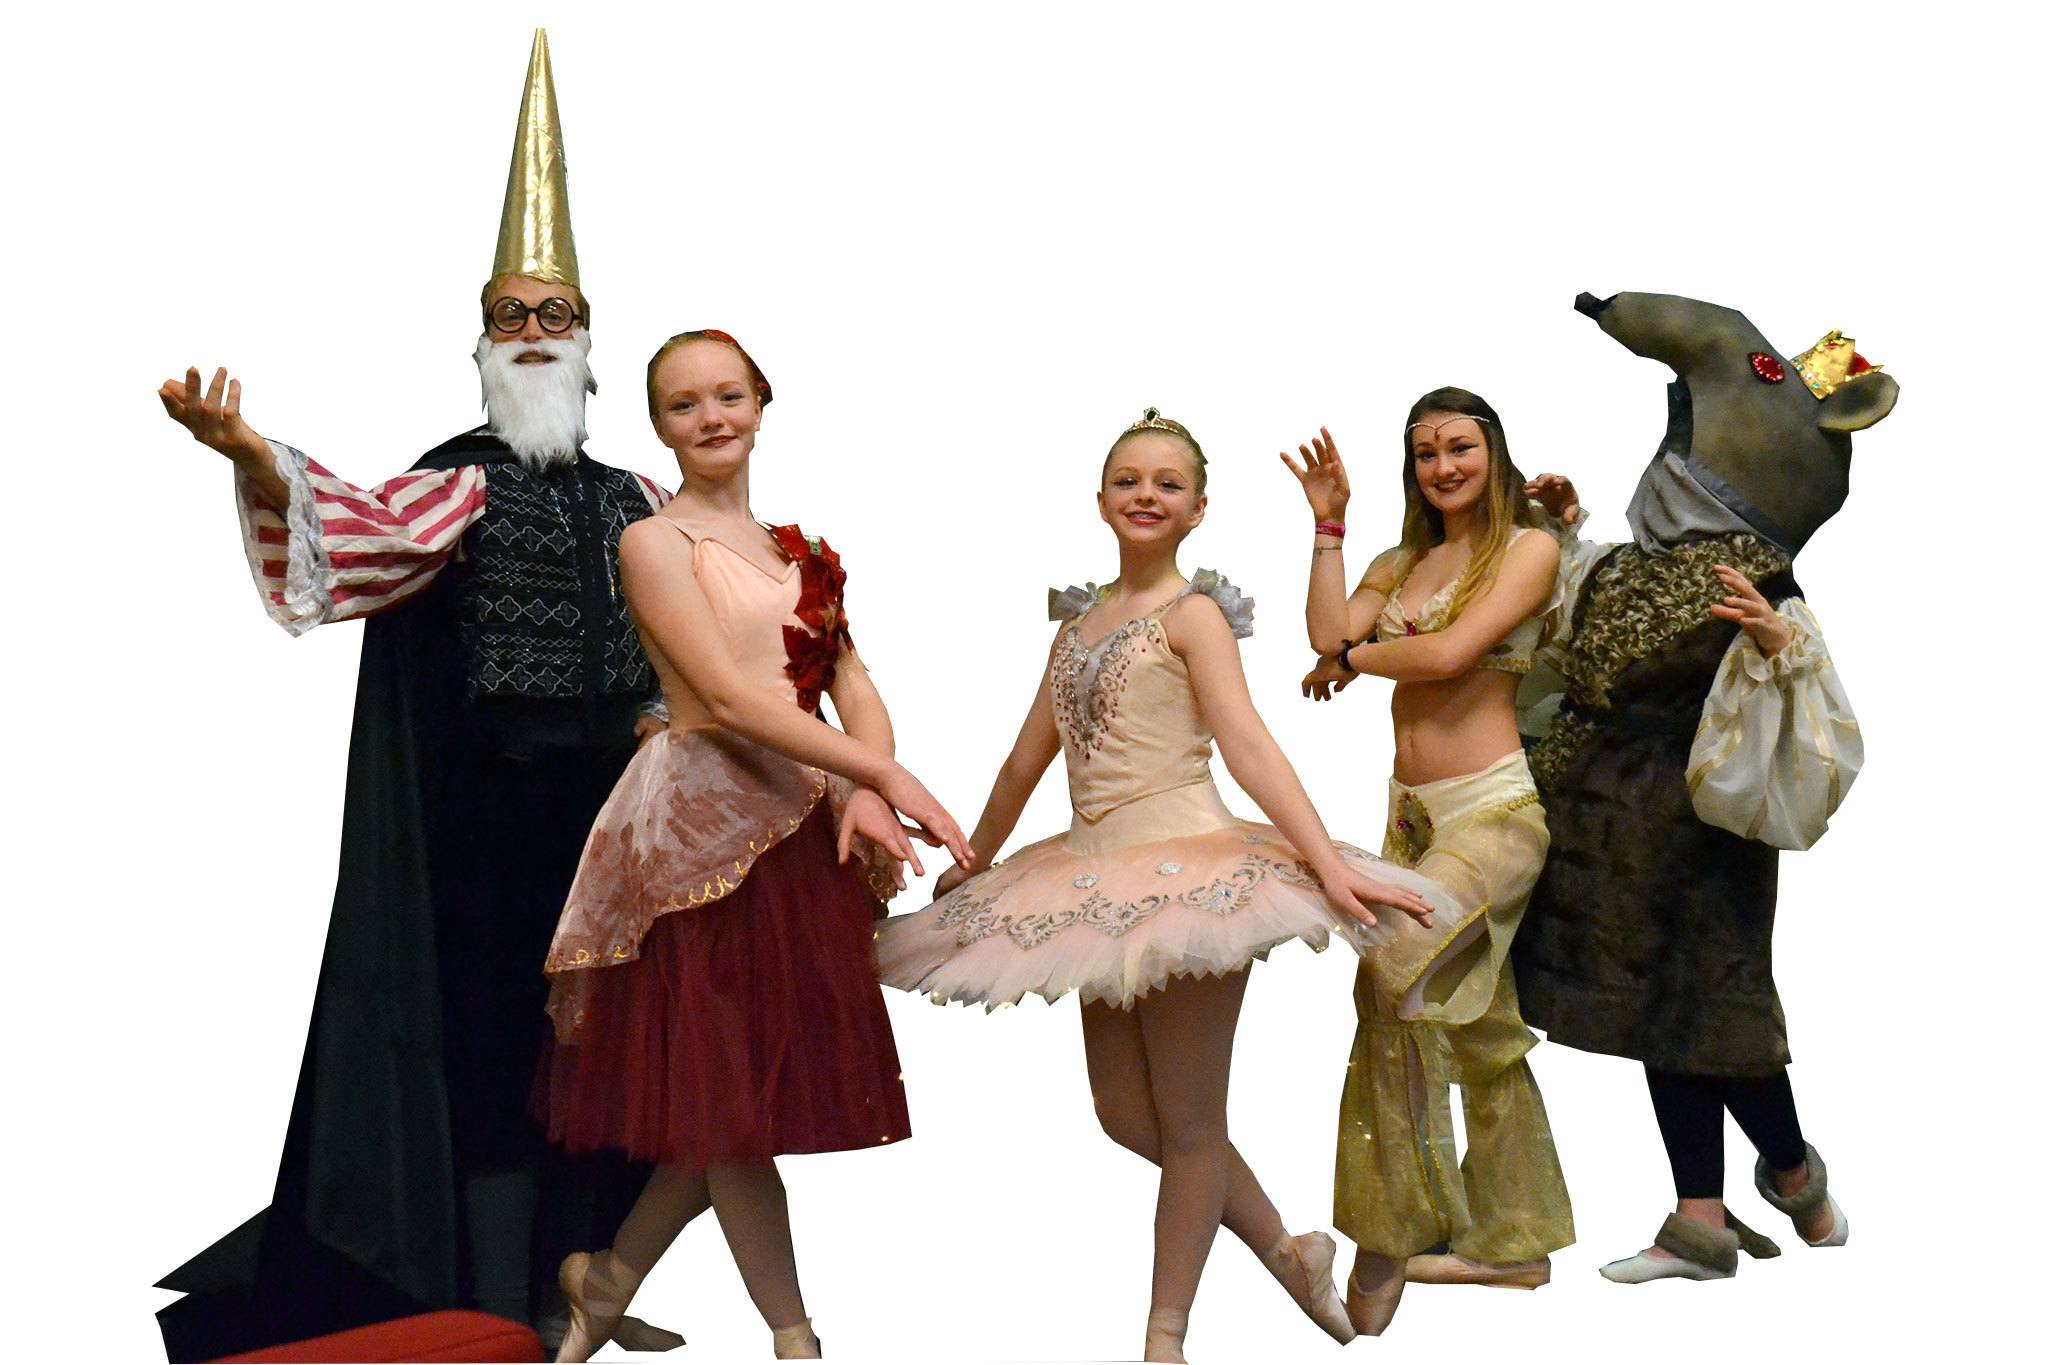 Principal actors in Sequim Ballet’s “The Nutcracker” featured, from left, are Brohm Dason, Eleanor Byrne, 13, Kate D’Amico, 13, Amara Sayer, 13, and Saige Turner, 15. The show runs Dec. 16-18 at Olympic Theatre Arts. Sequim Gazette photos by Matthew Nash